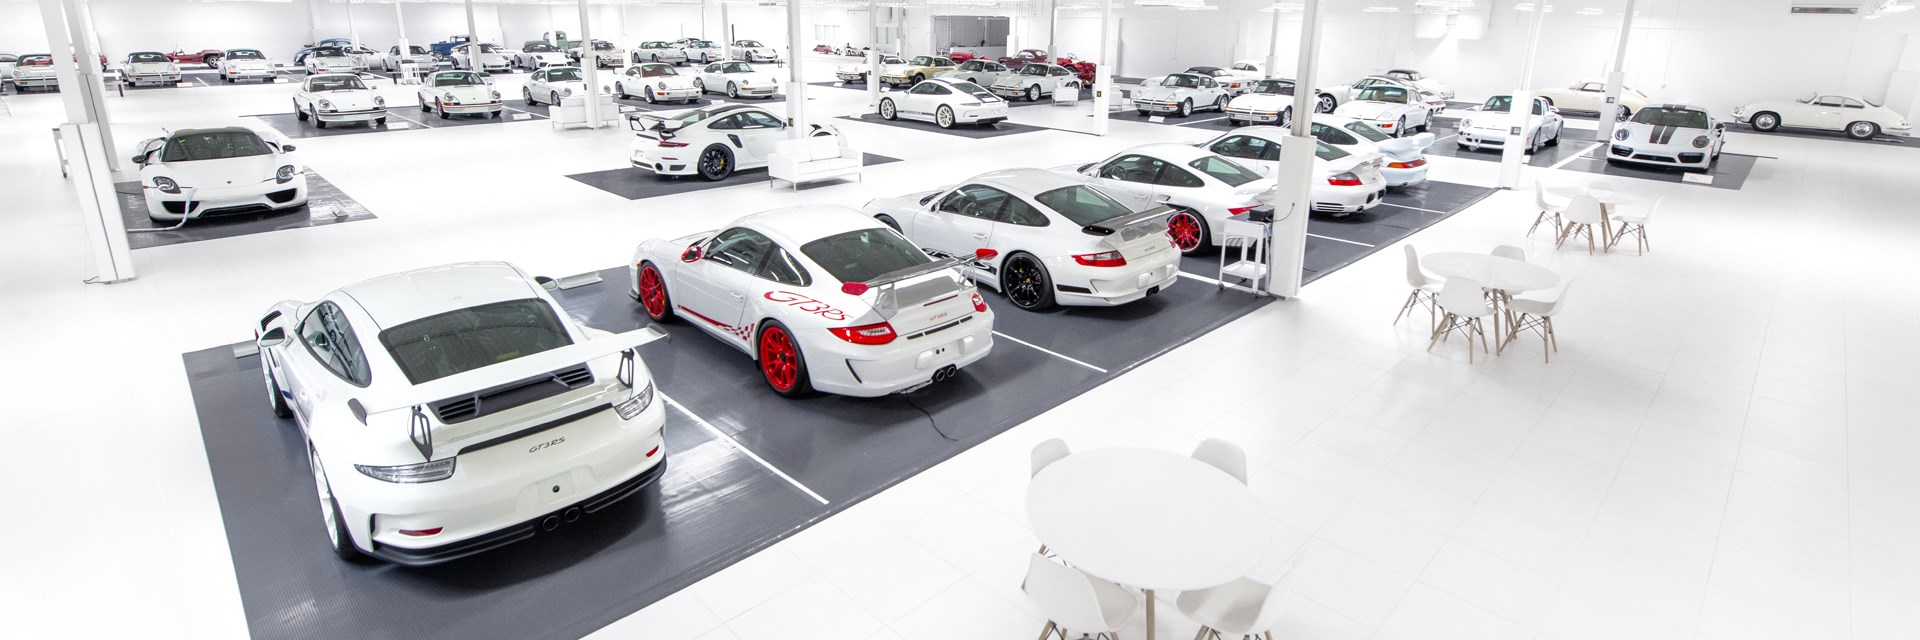 Porsche ‘White Collection’ by RM Sotheby’s is Going to Auction in Dec. 2023